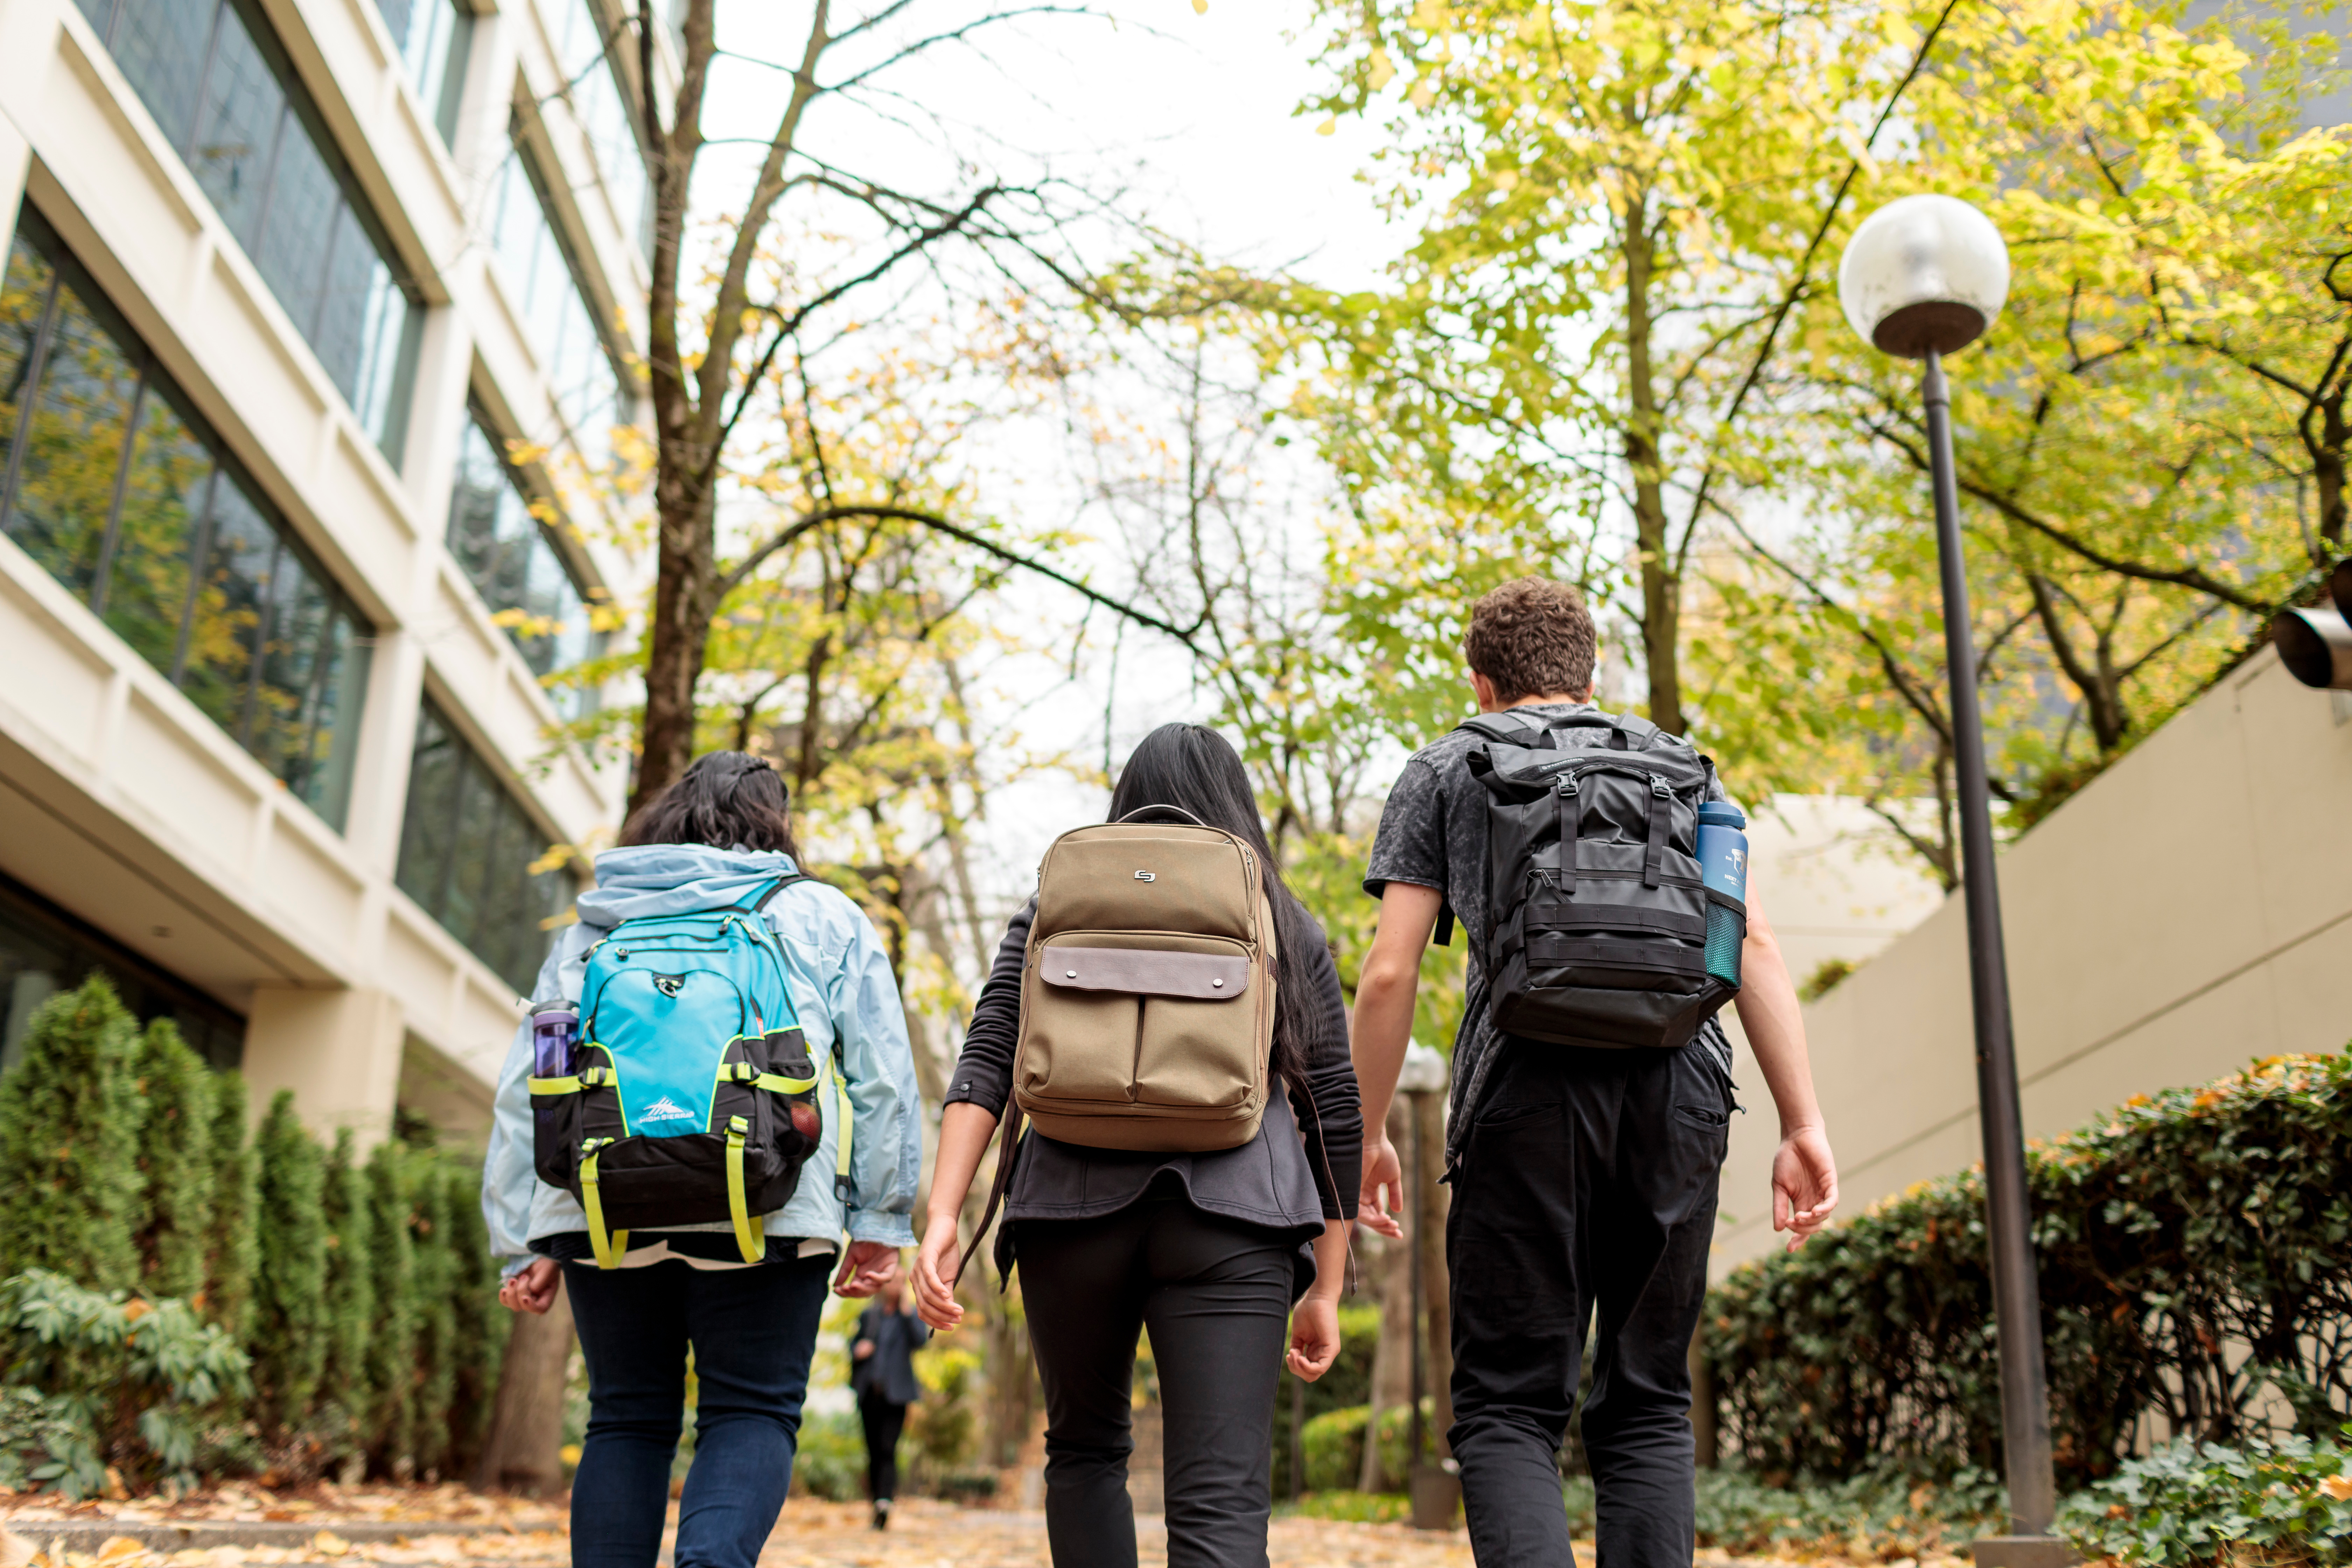 three people with backpacks on walking away from the camera